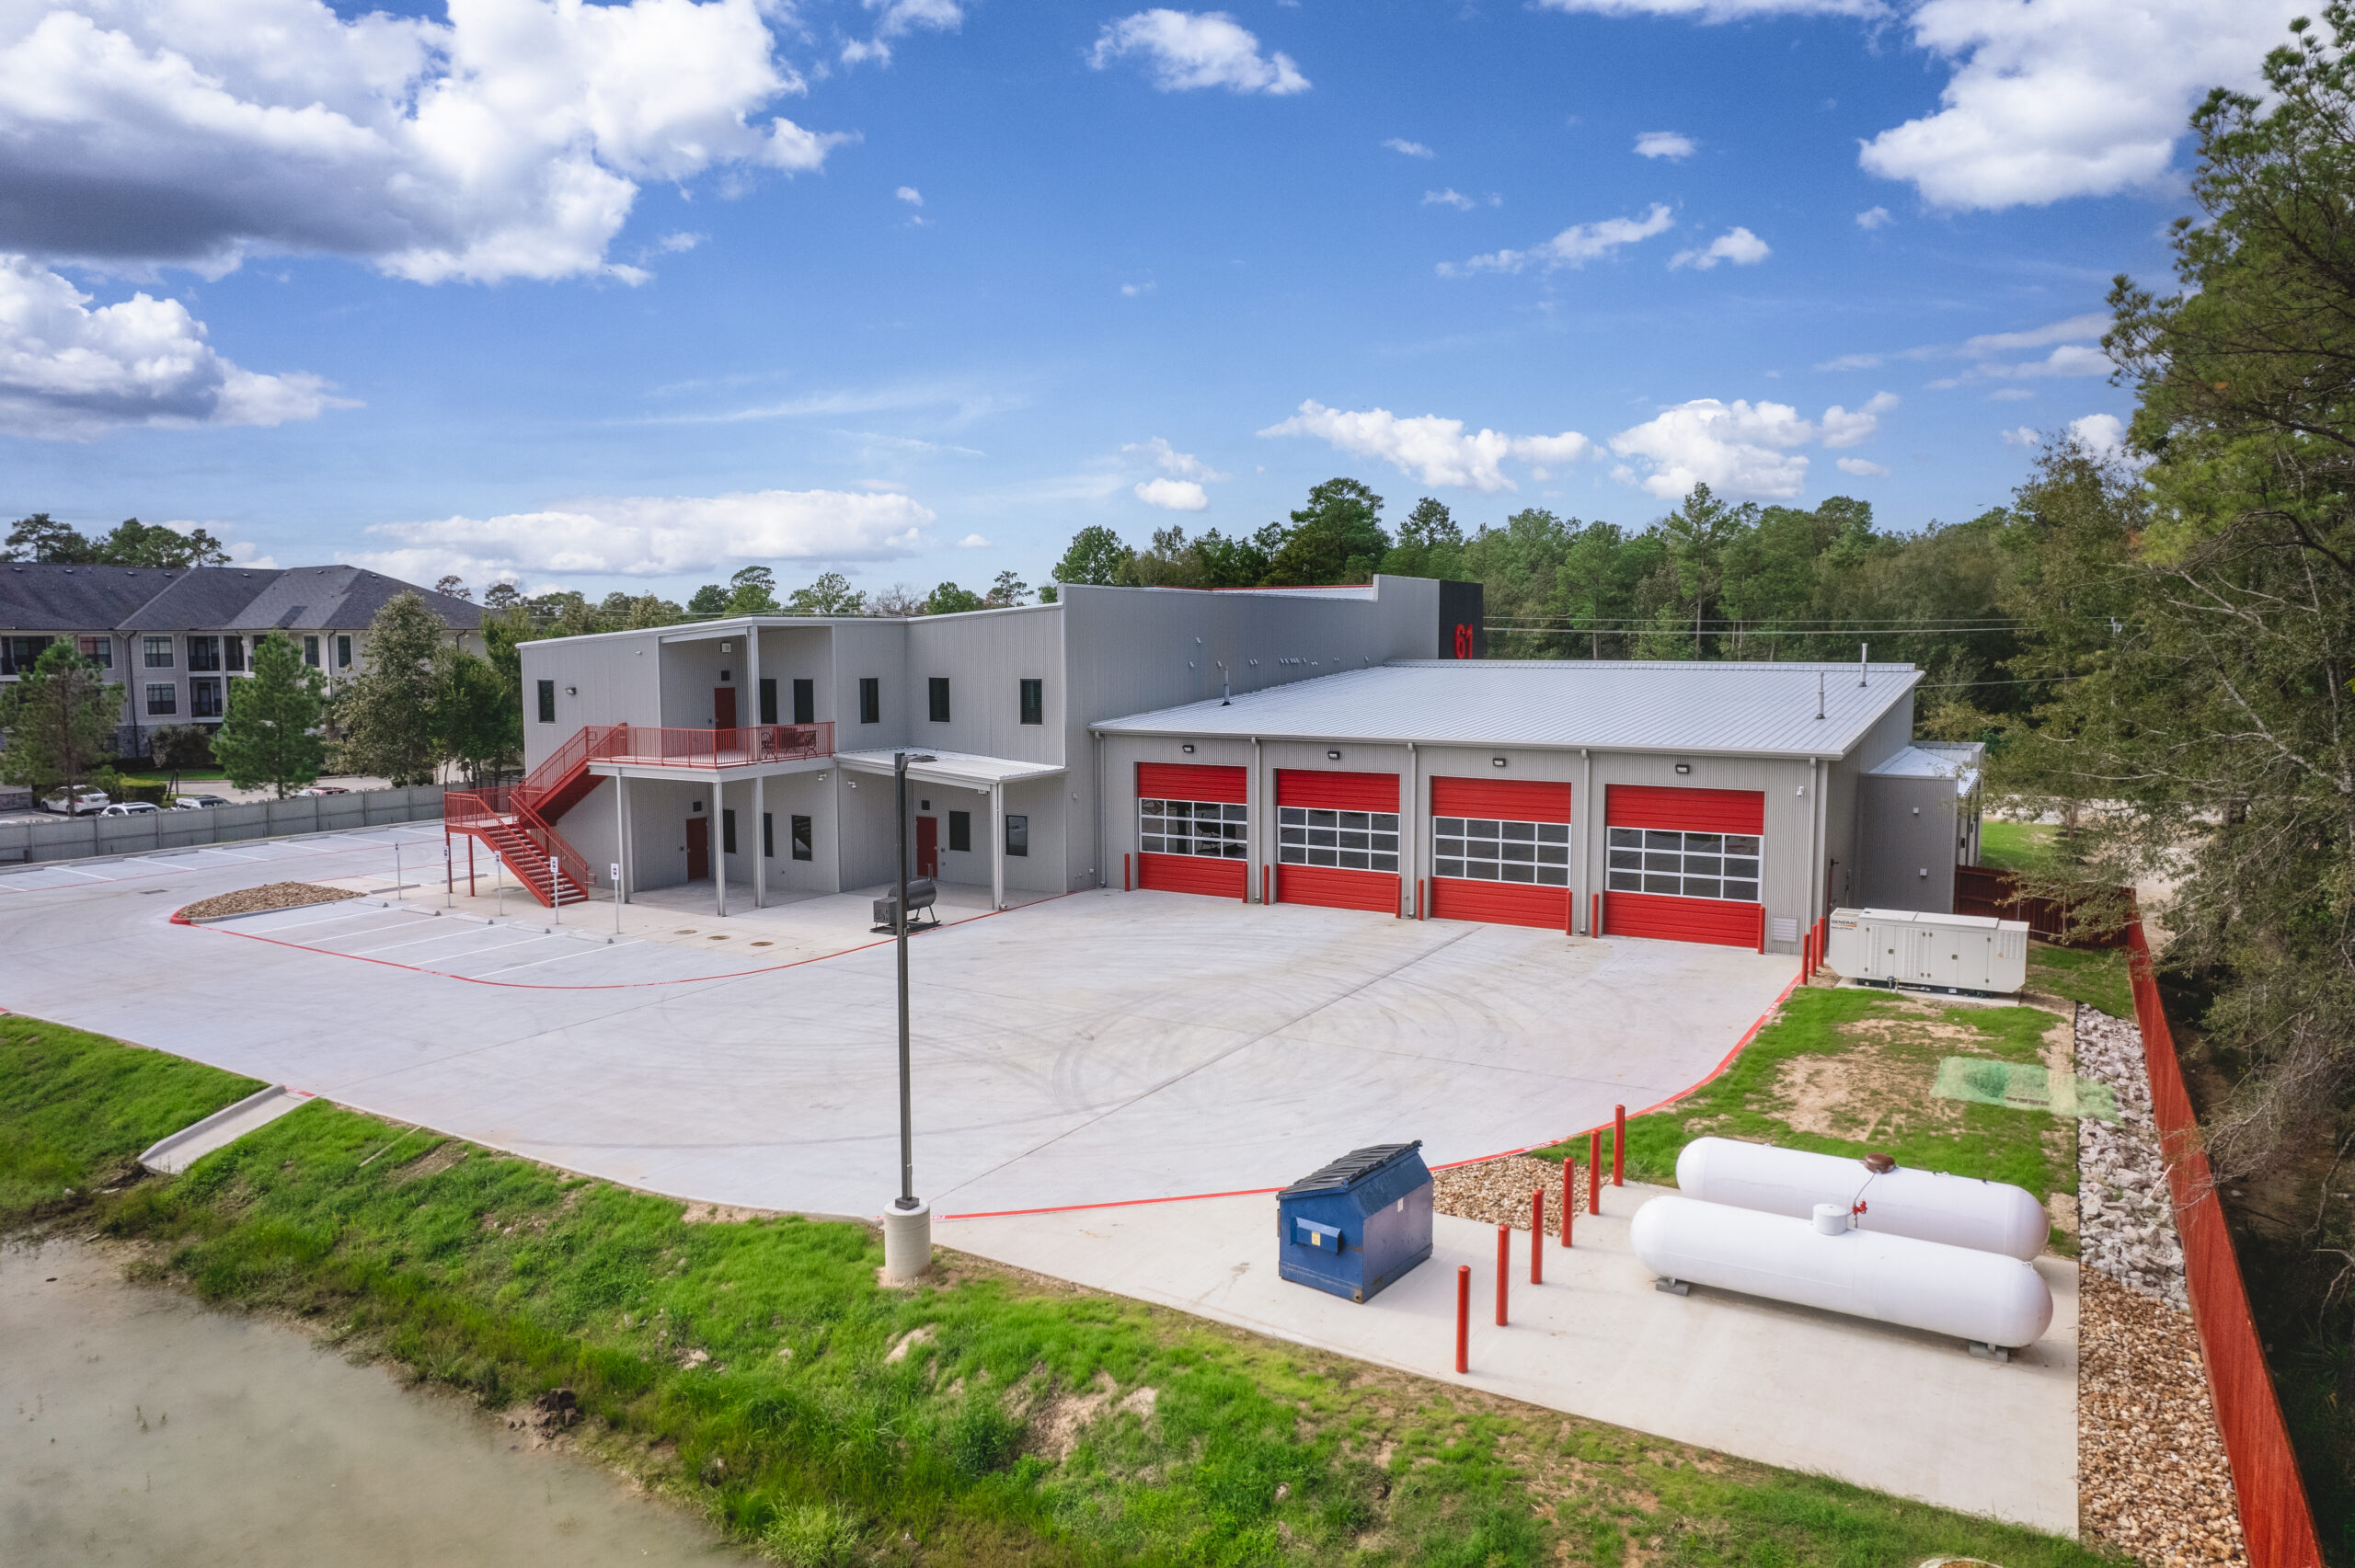 23__Day Time Exterior Firehouse-5